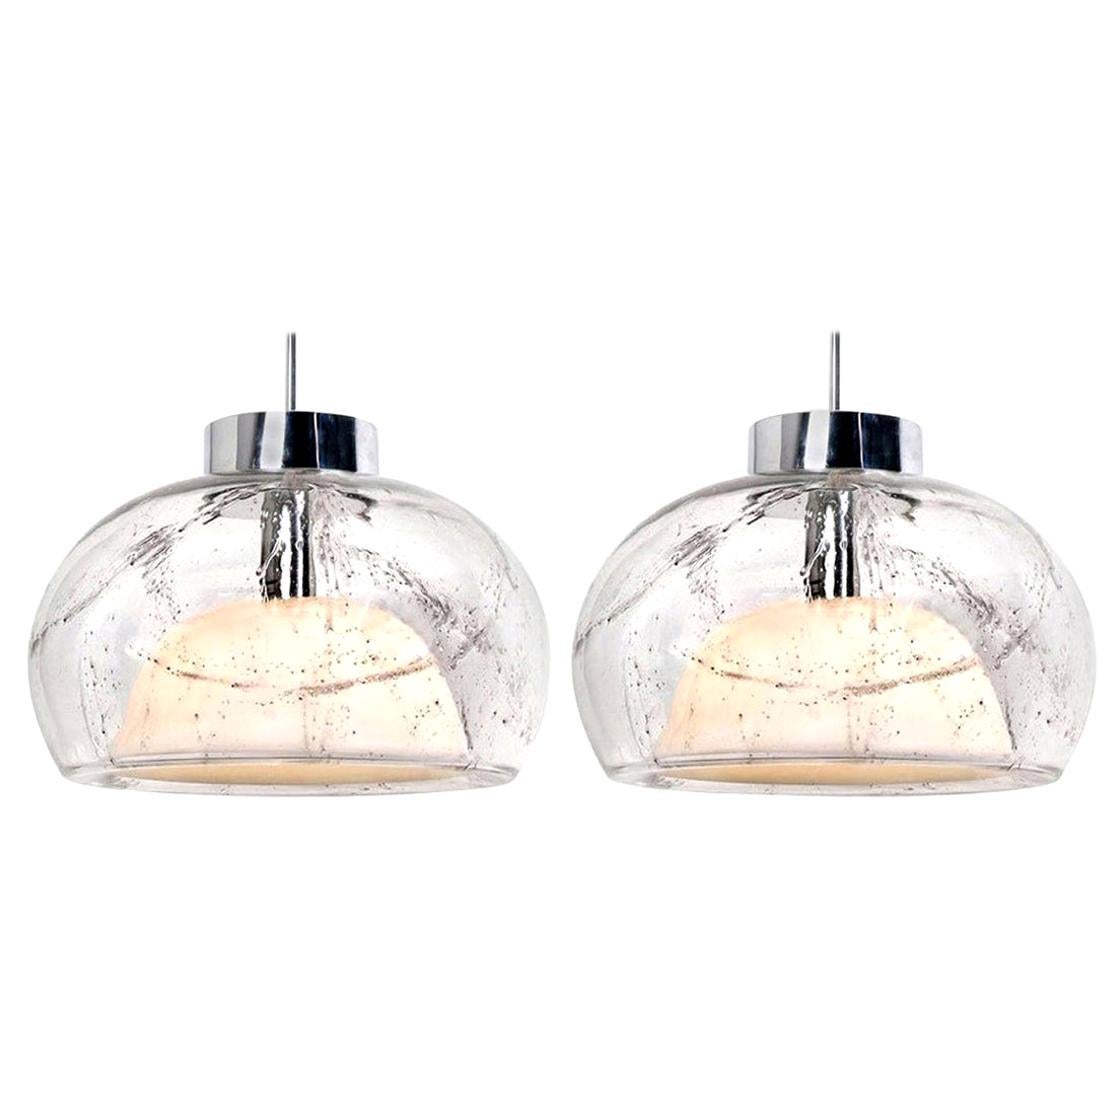 Pair of Hand Blown Glass Pedant Lights by Doria, Germany, 1970s